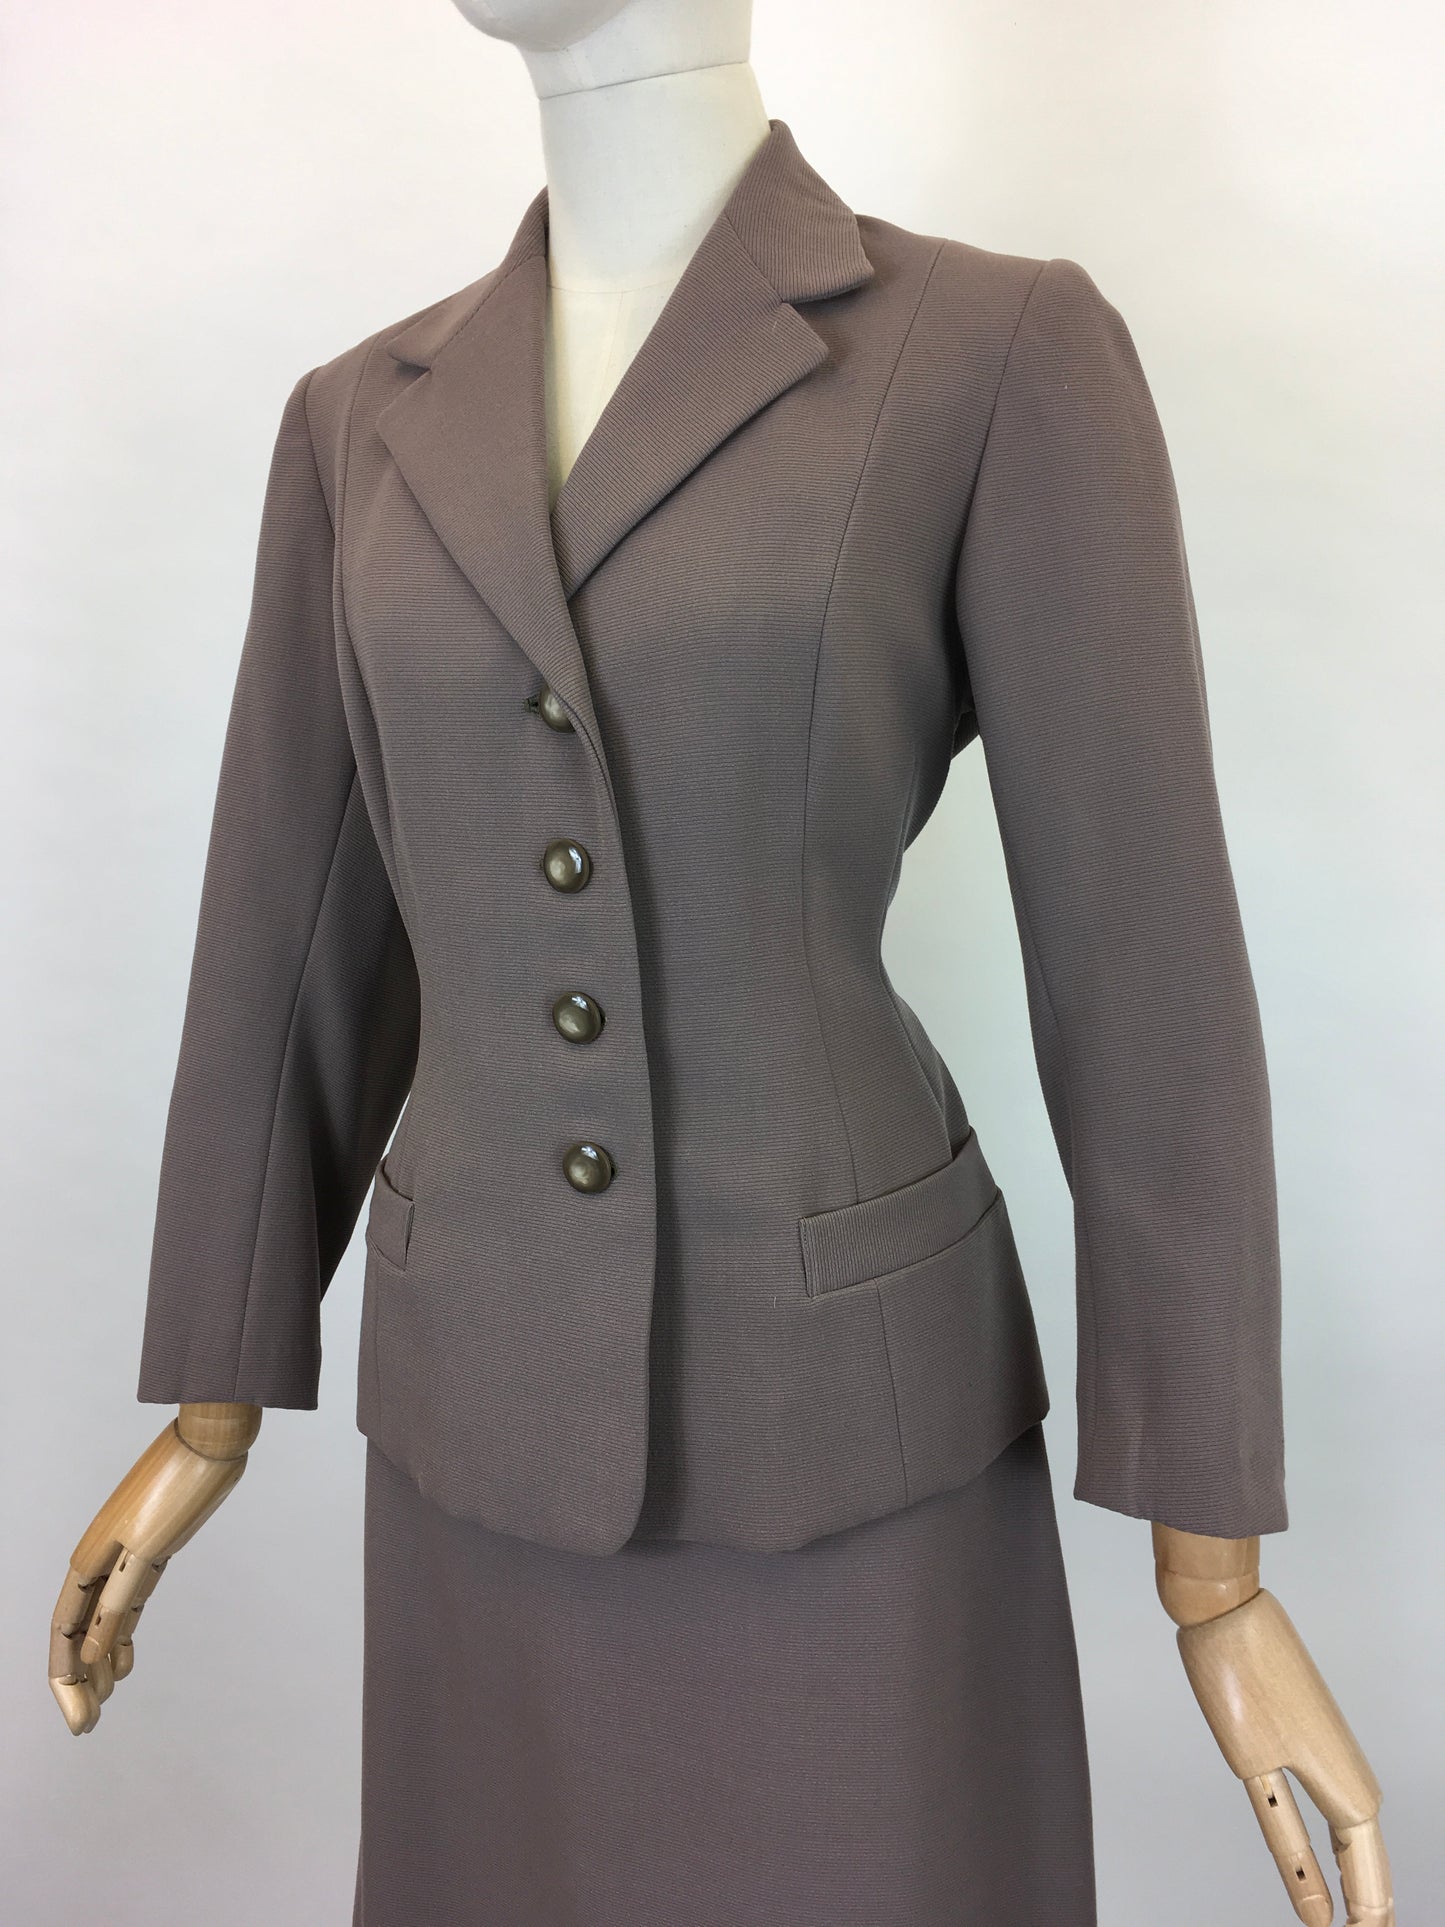 Original 1950’s Beautiful 2 pc Suit - In A Muted Mink Colour